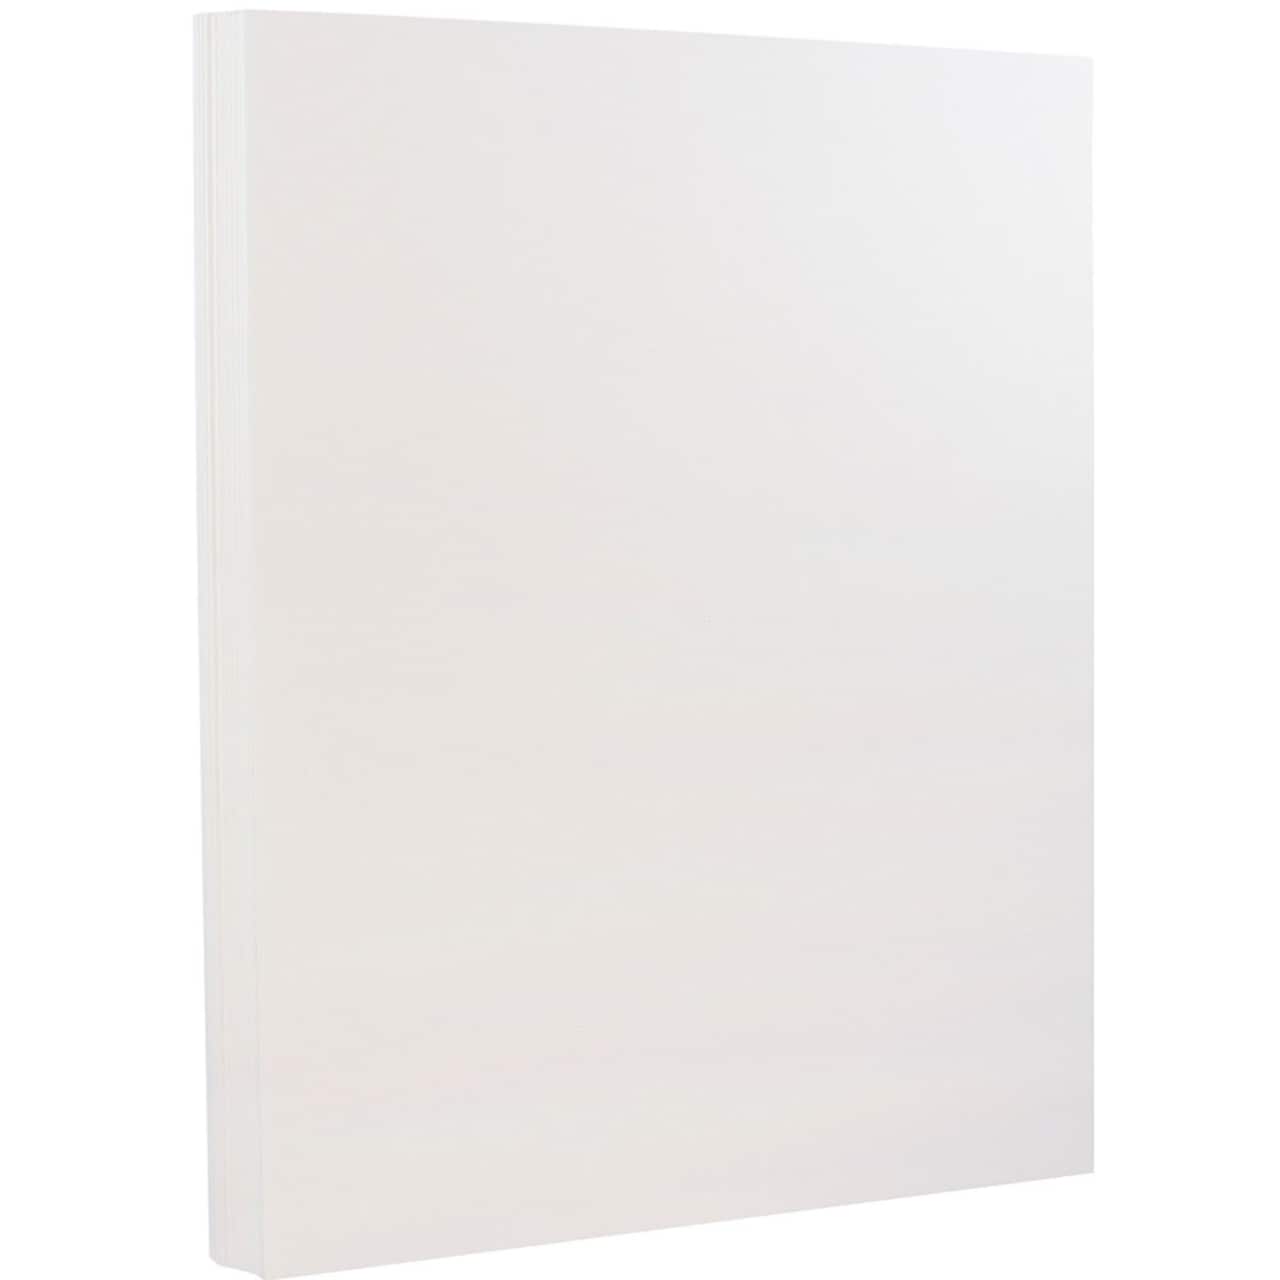 JAM Paper Bright White Wove 8.5 x 11 Extra Heavy Weight 130lb. Strathmore  Cardstock